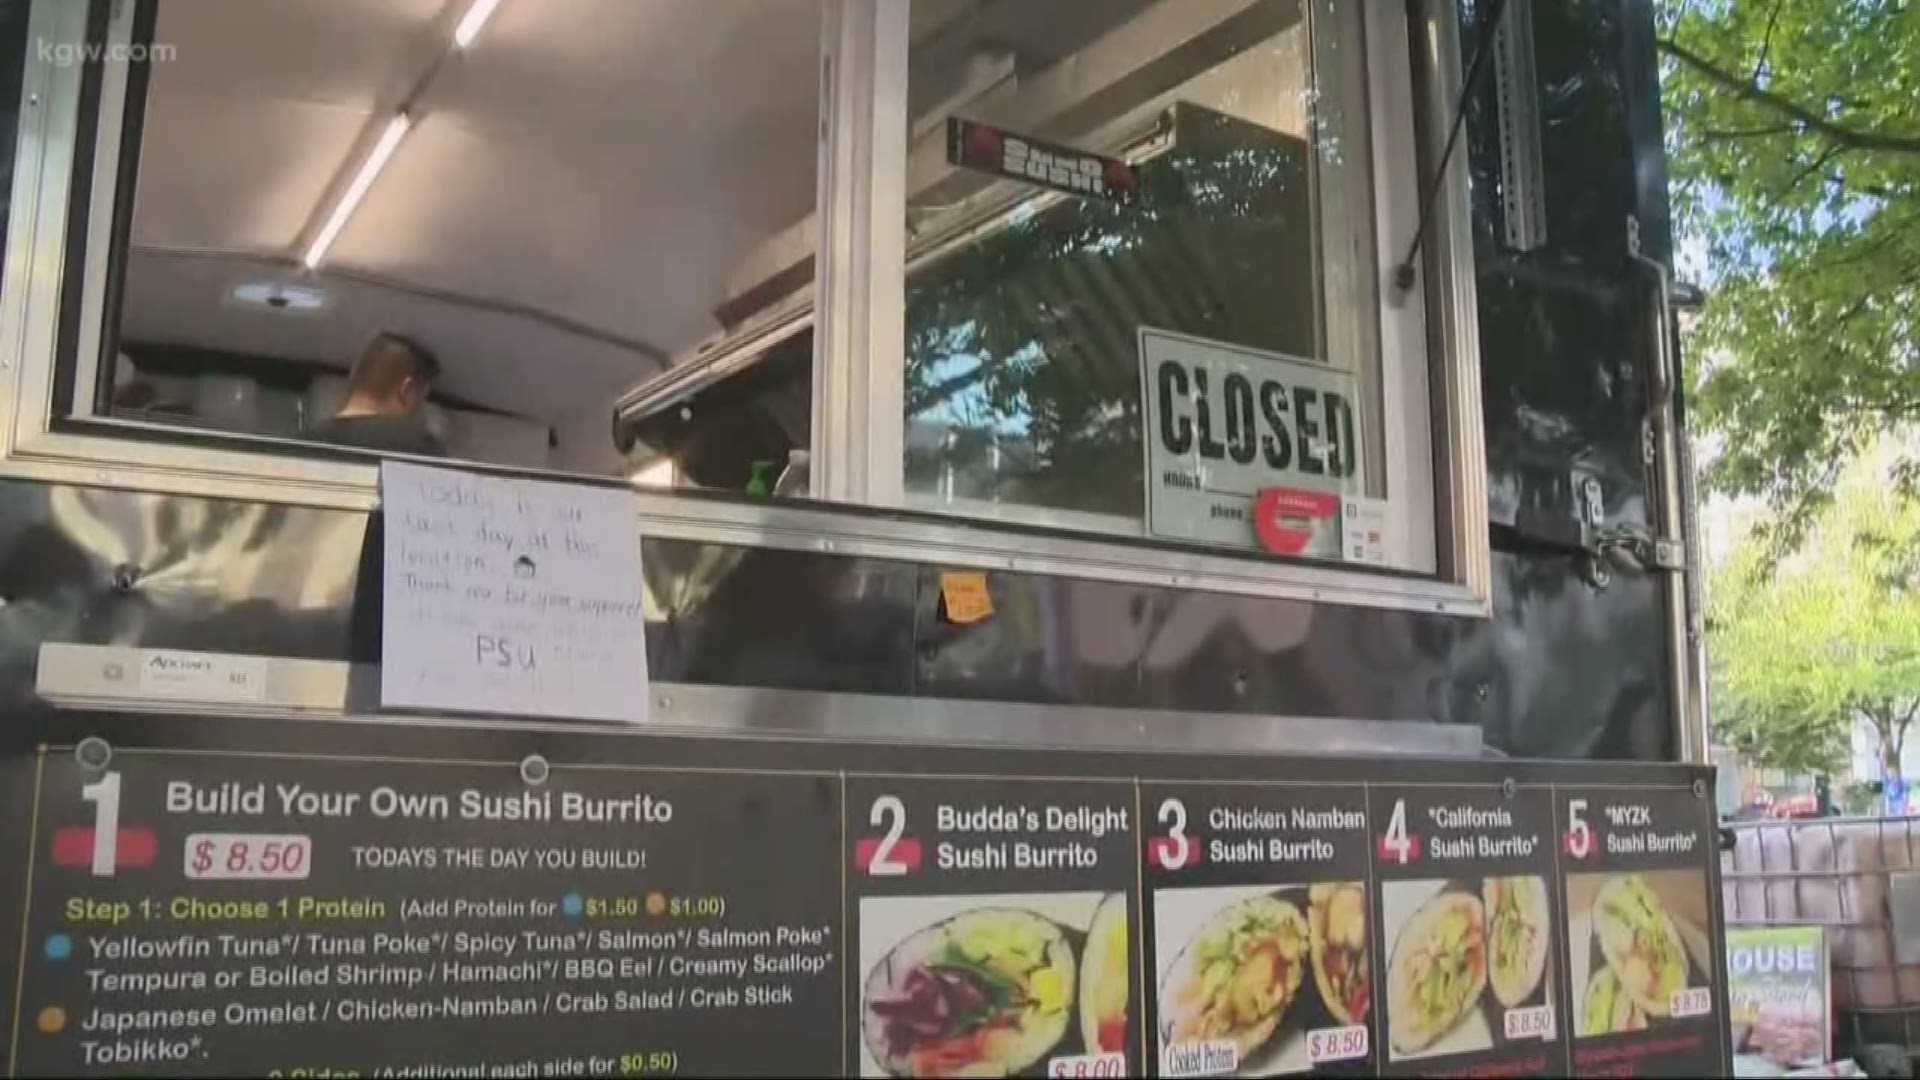 The Alder Street food carts may soon have a new home downtown.